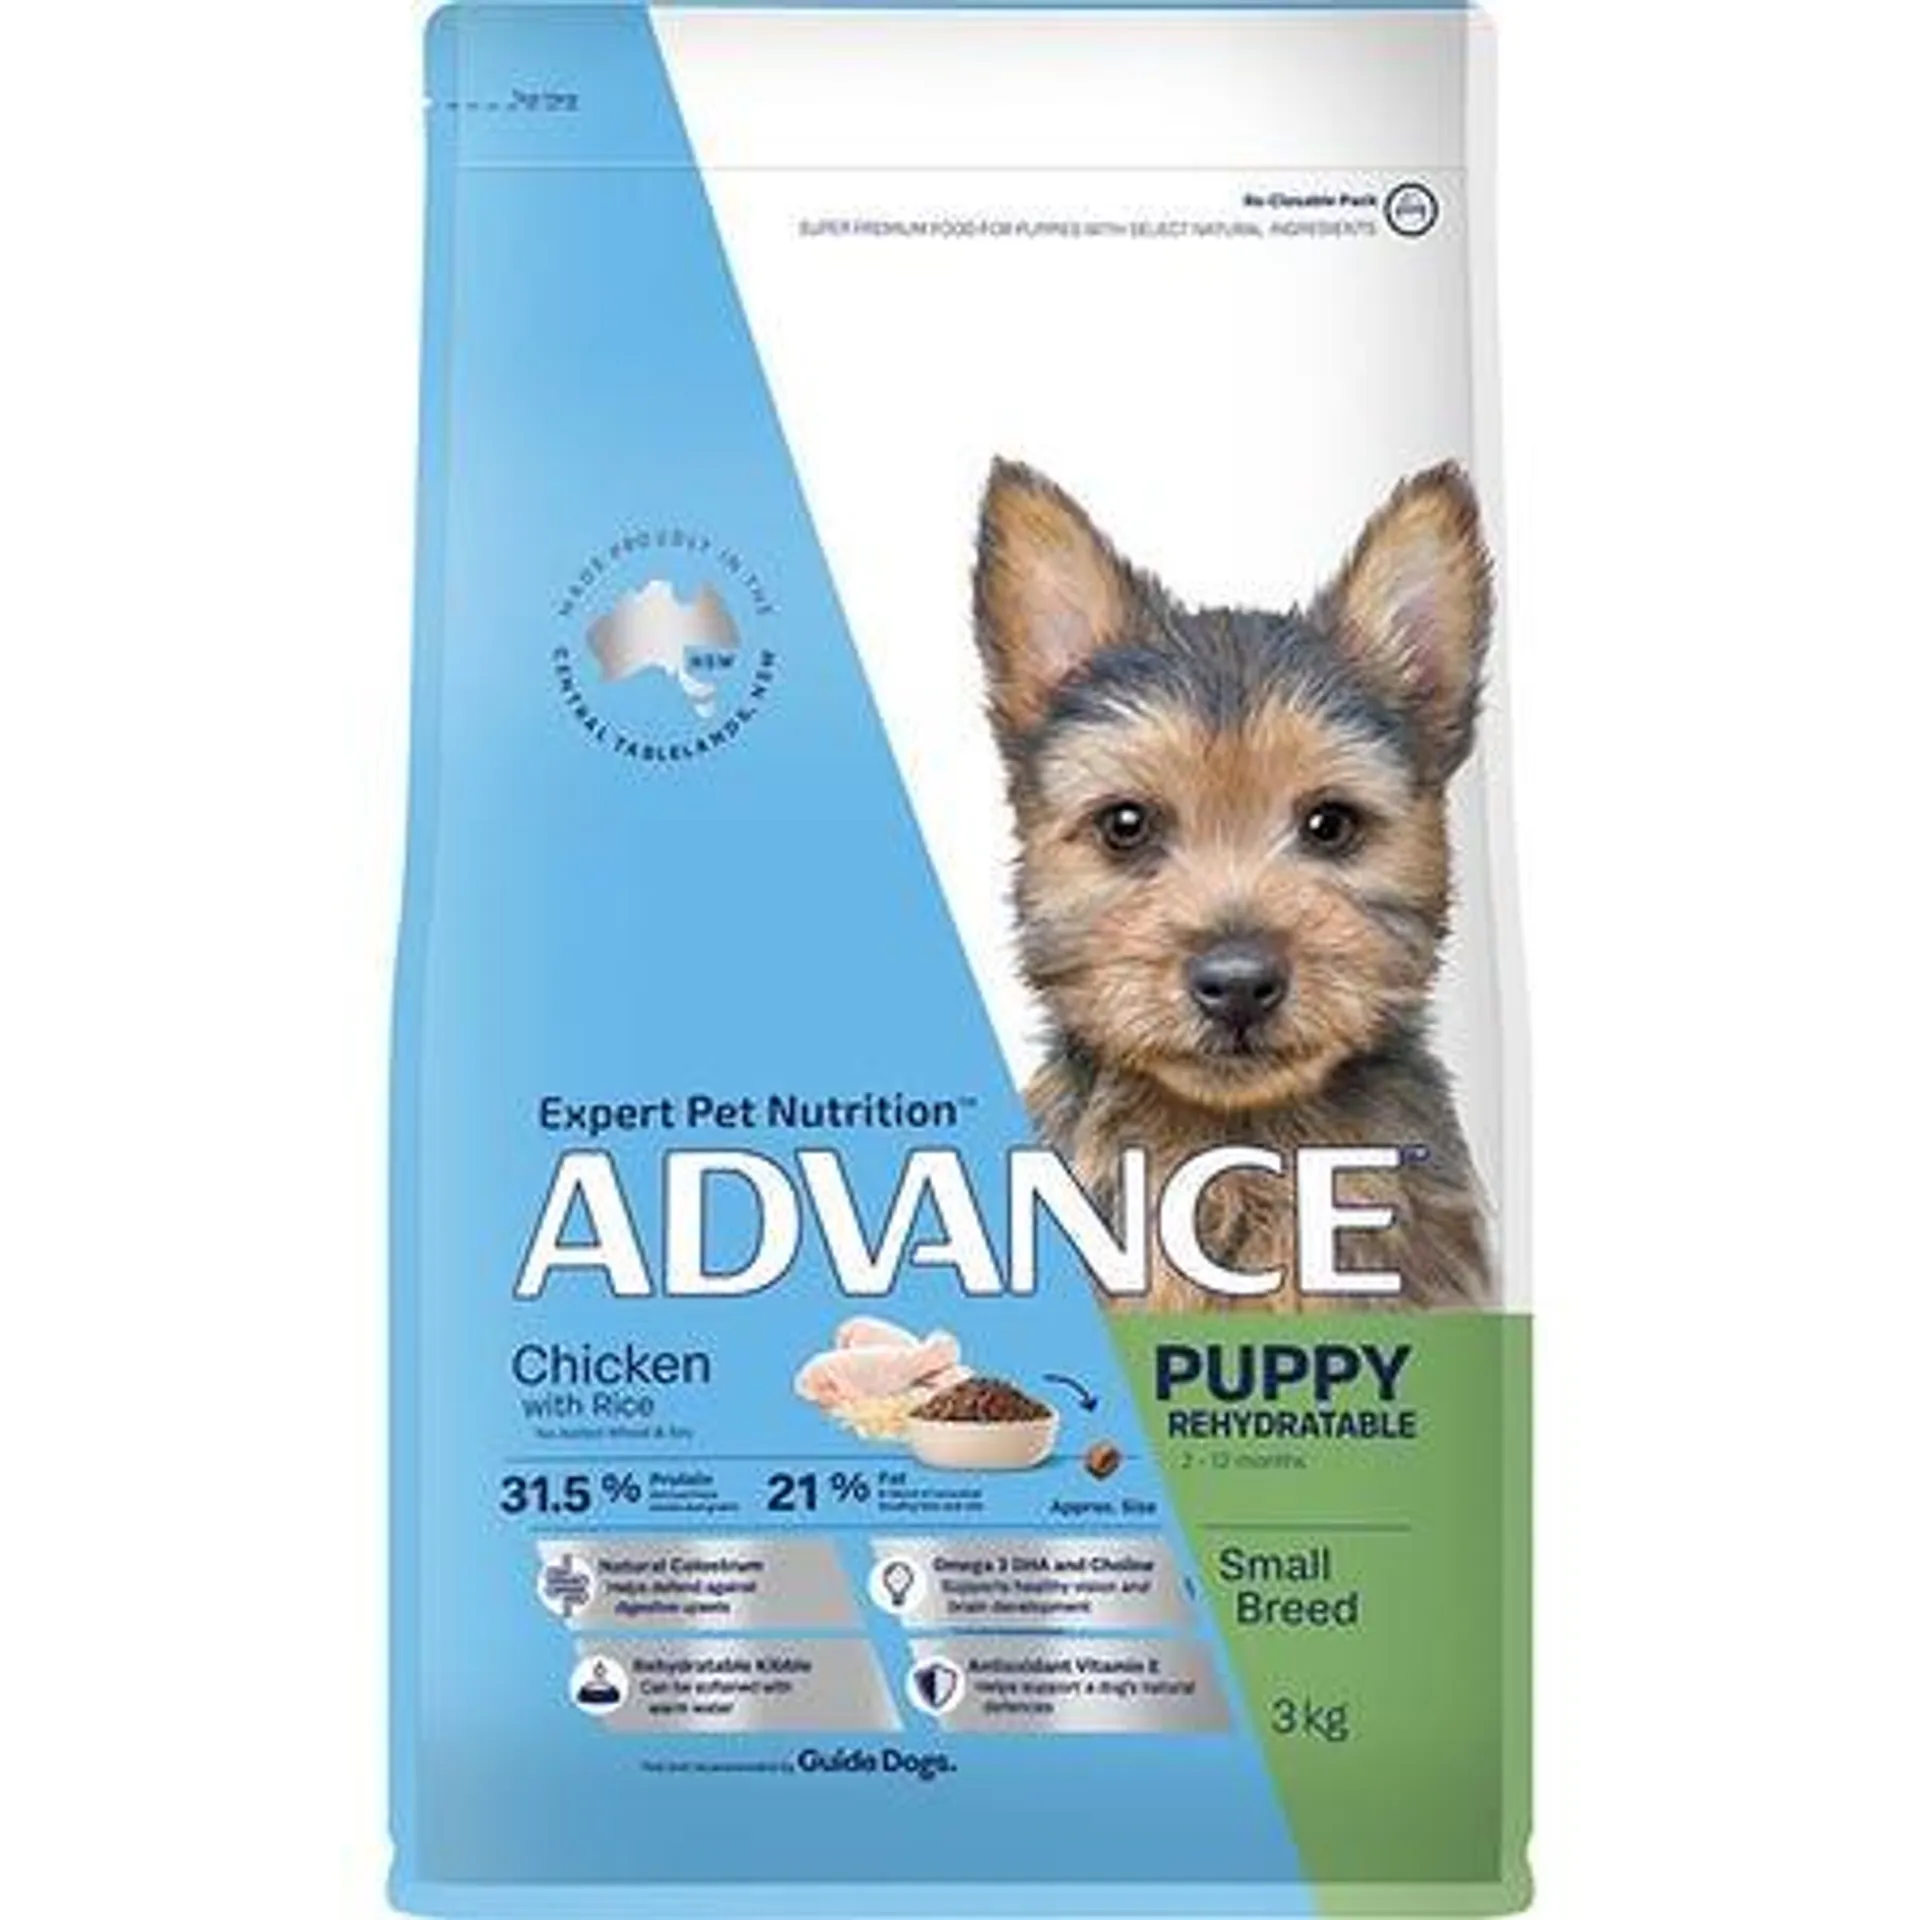 ADVANCE Puppy Rehydratable Small Breed Dry Dog Food Chicken with Rice